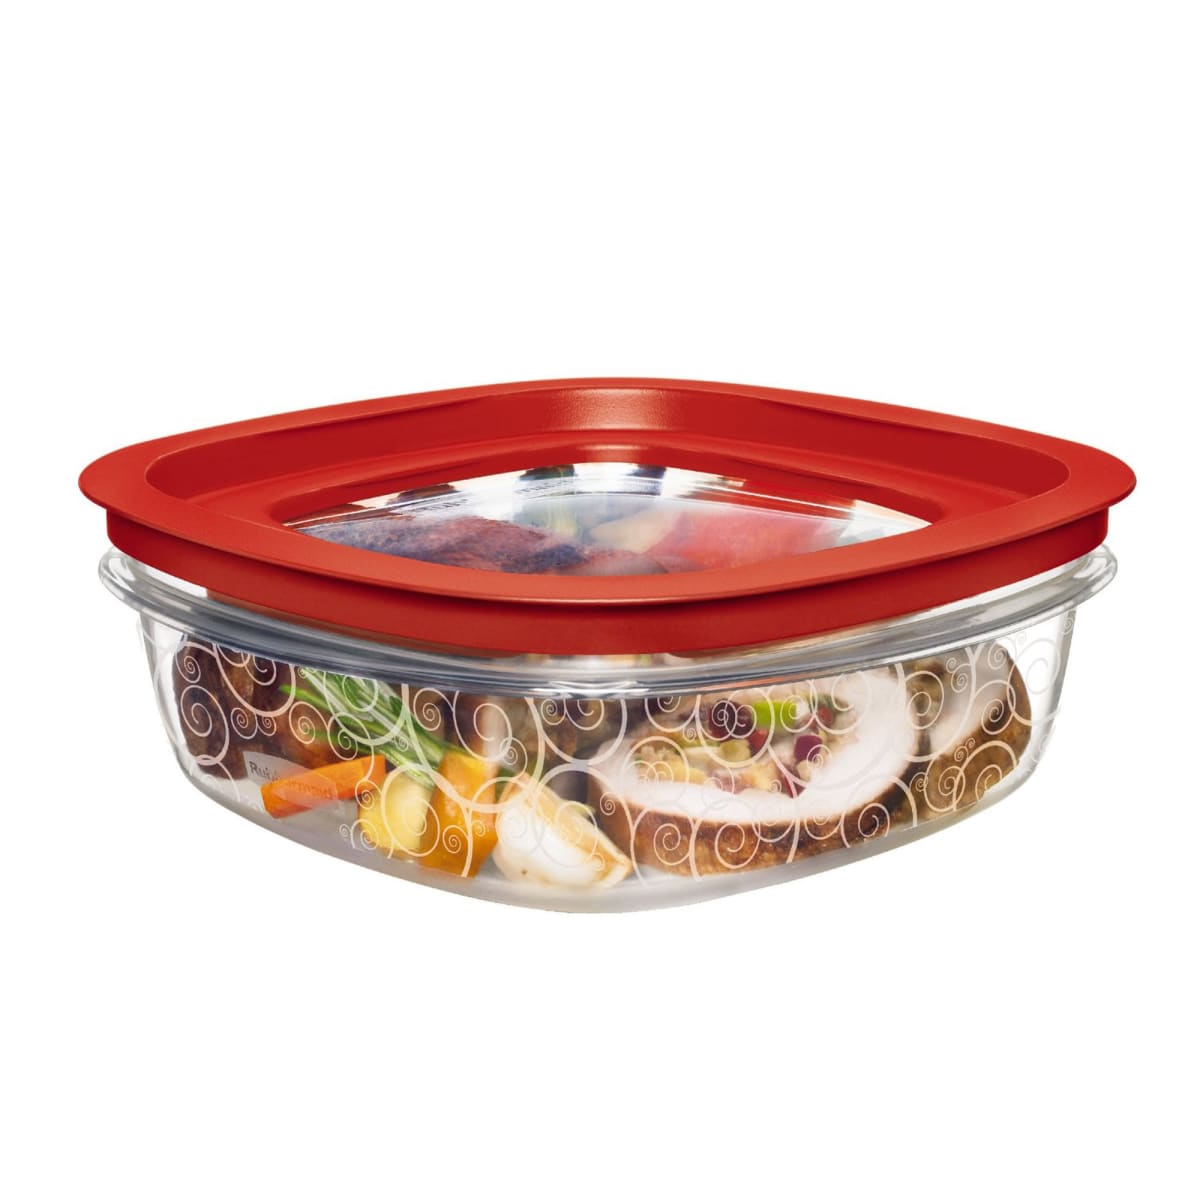 Rubbermaid Commercial Premier Storage Container w Lid SKU#RCP7H78